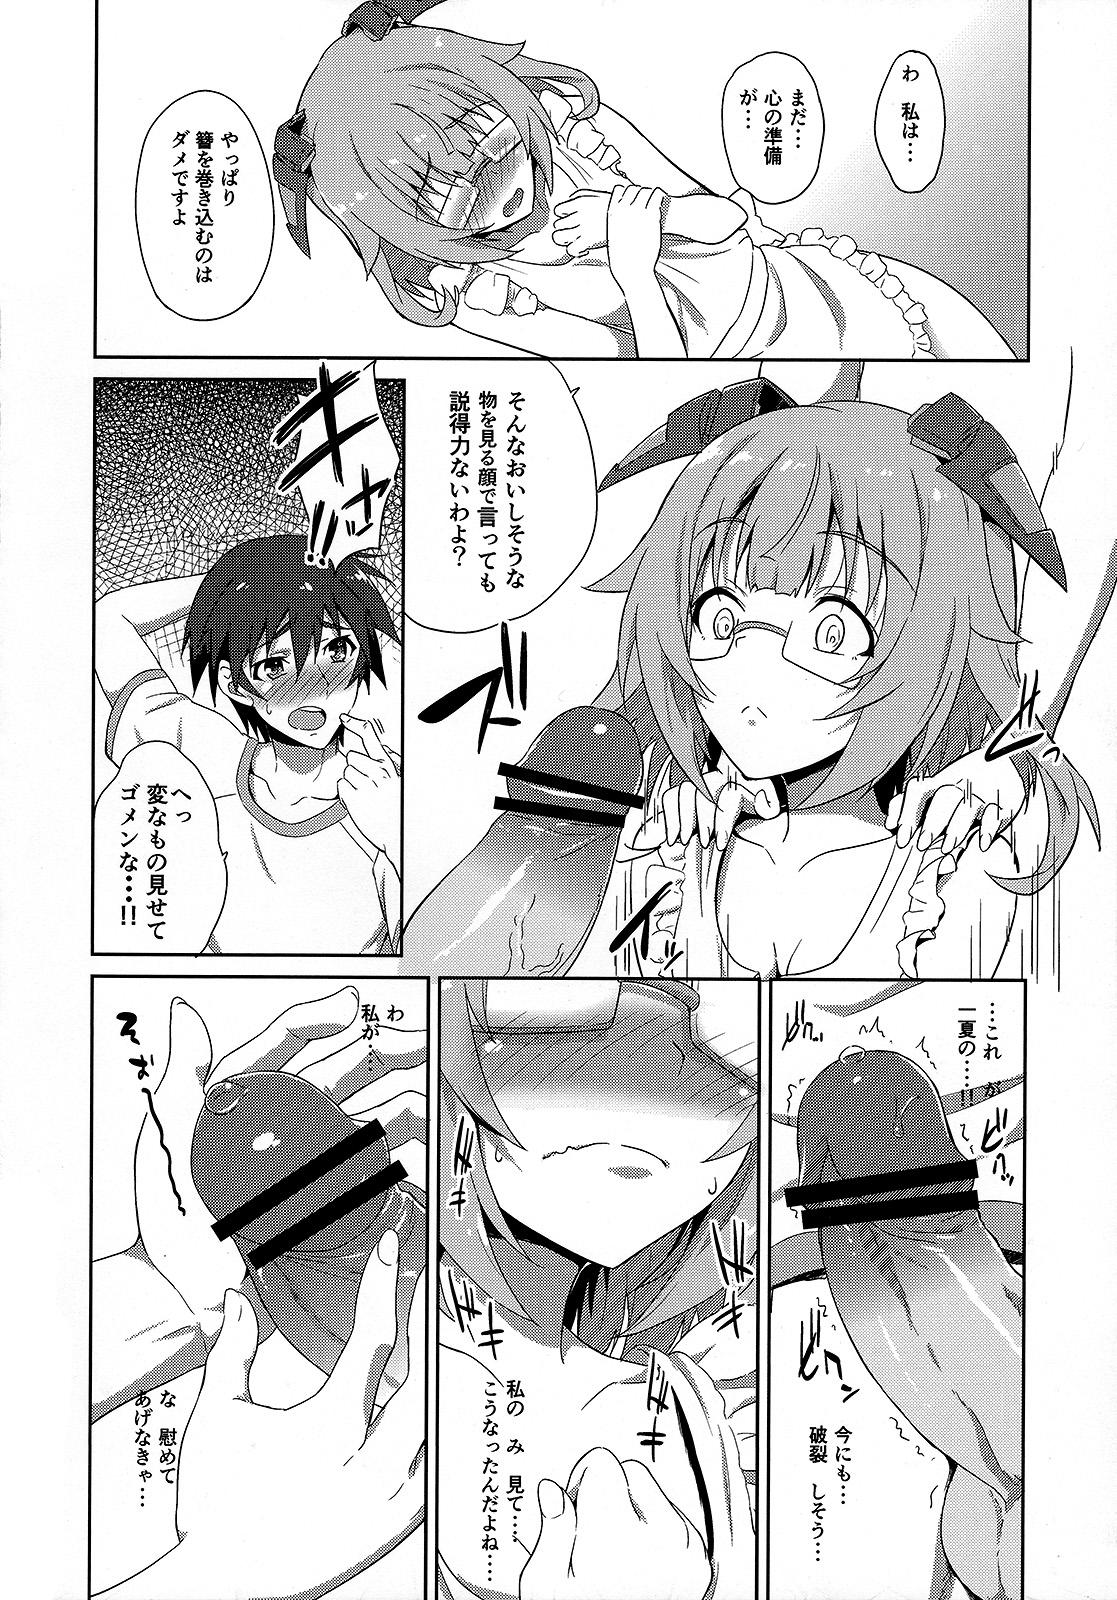 Tanned IS ICHIKA LOVE SISTERS!! - Infinite stratos Hot Girl Porn - Page 7